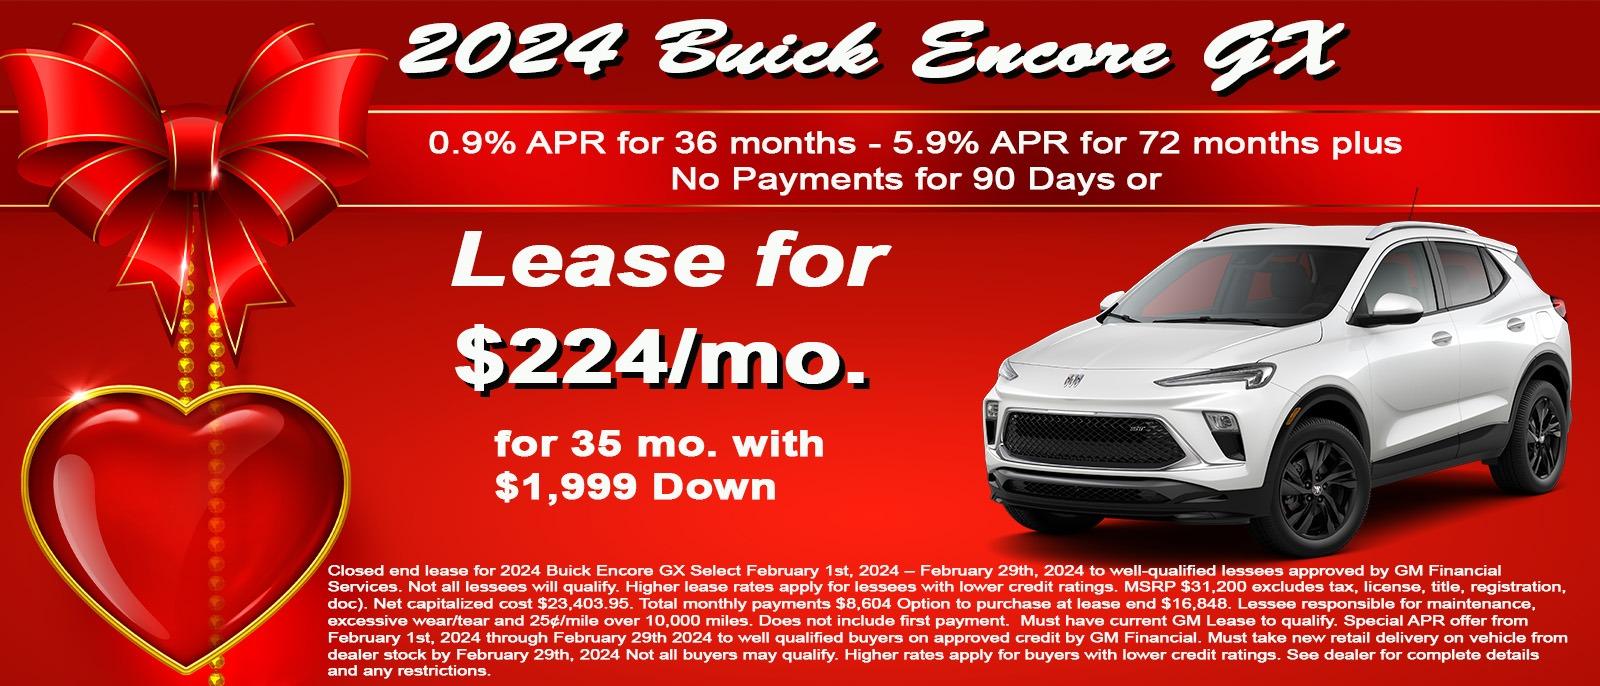 Lease your new 2024 Buick GX for only $224